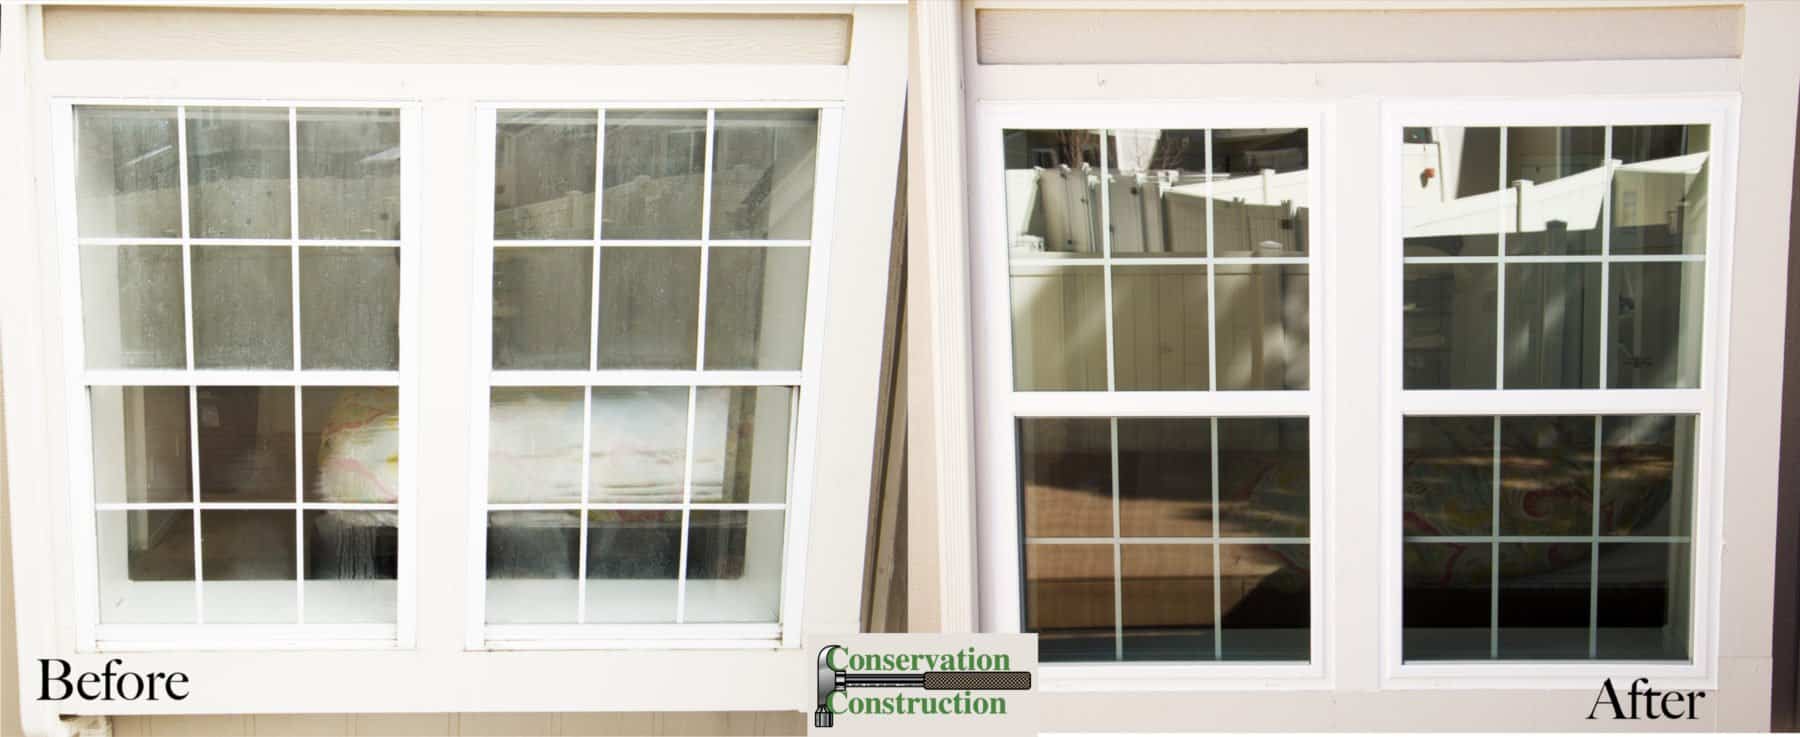 Conservation Construction, New Windows, Window Replacement, Replacement WIndows